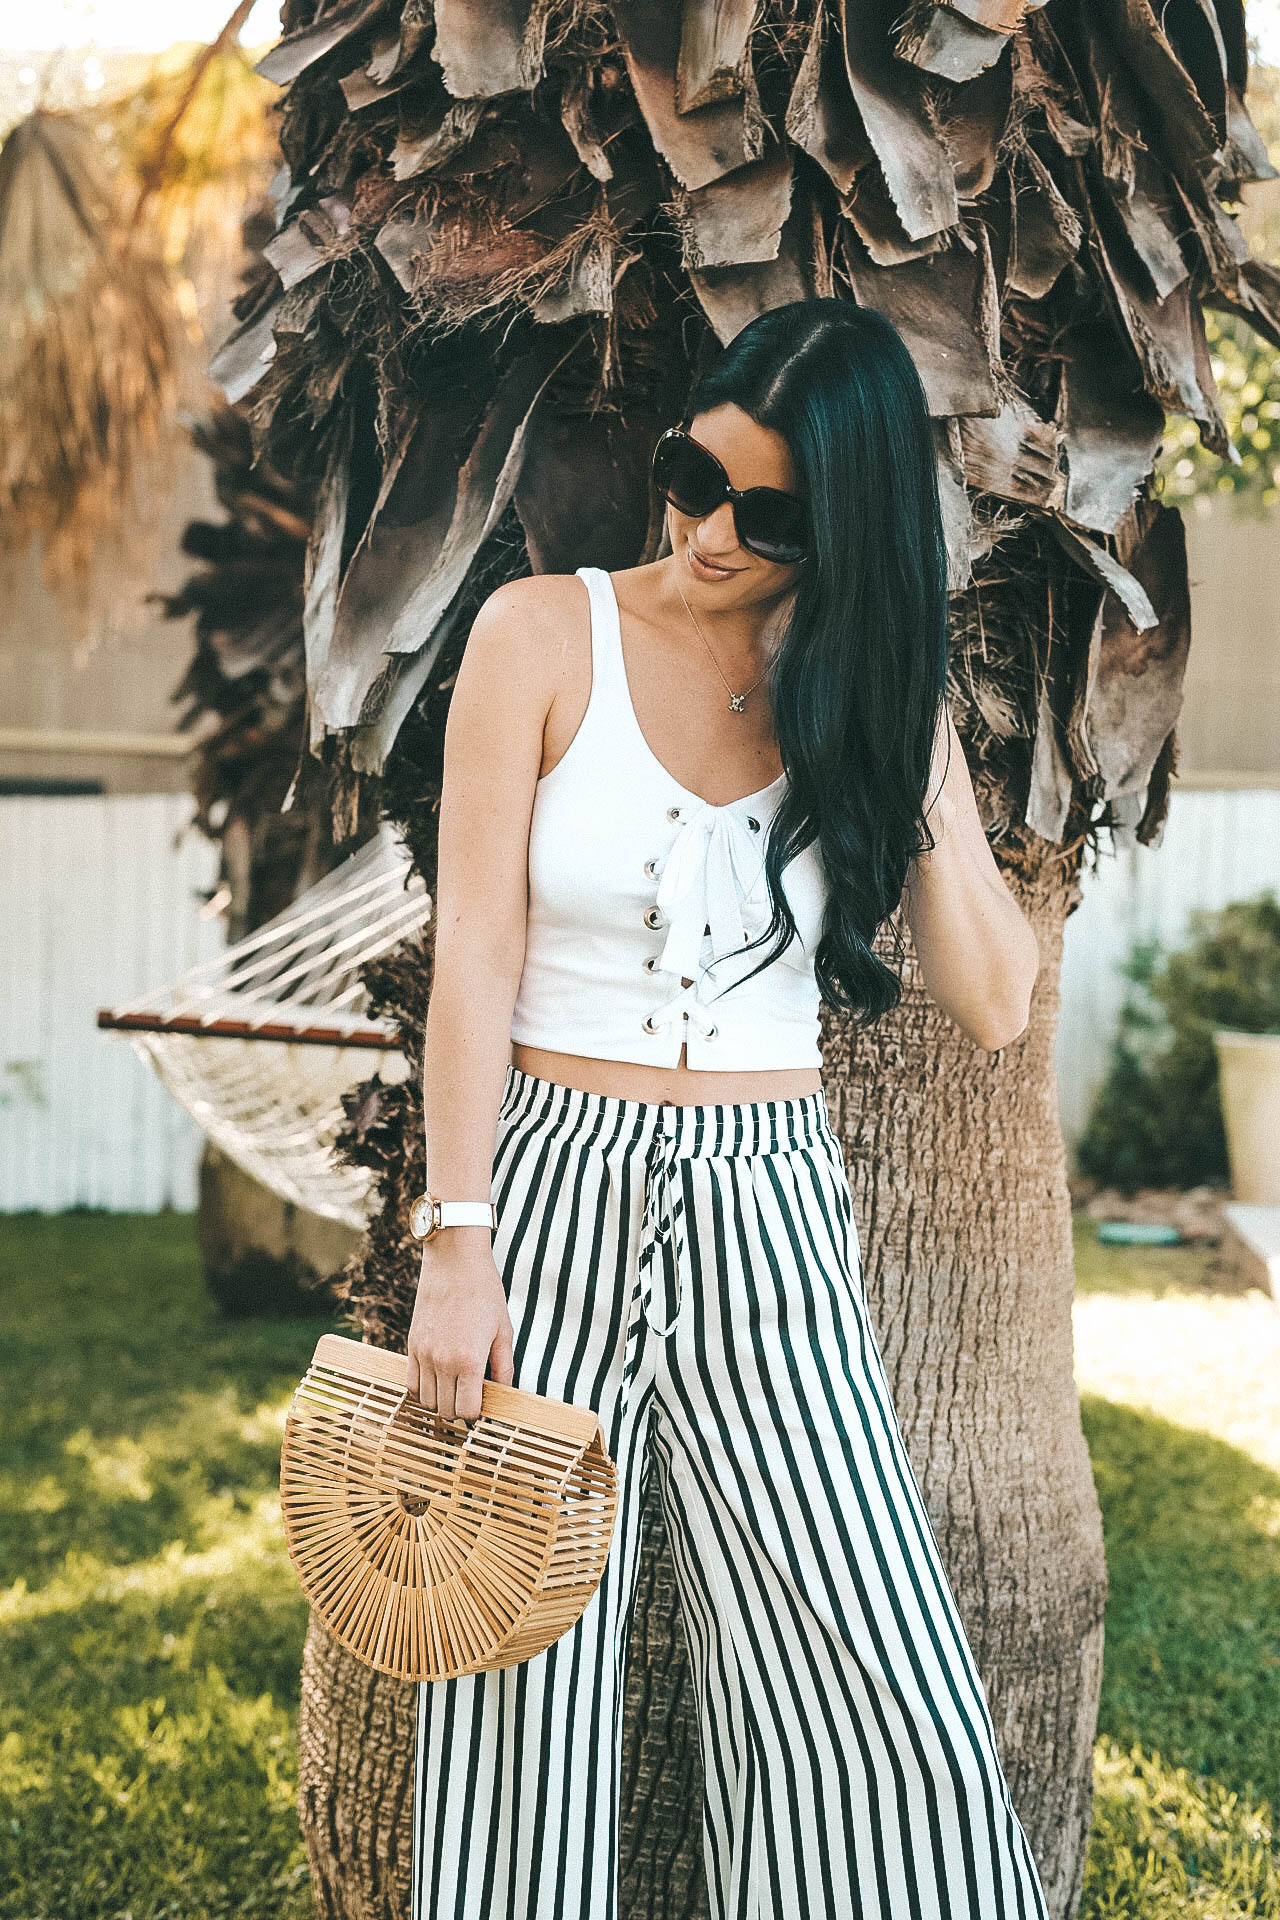 How to Style Striped Wide Leg Pants for Summer | summer pants | striped pants outfit | summer outfit ideas || Dressed to Kill #style #fashion #womensoutfits #stripedpants #summerstyle